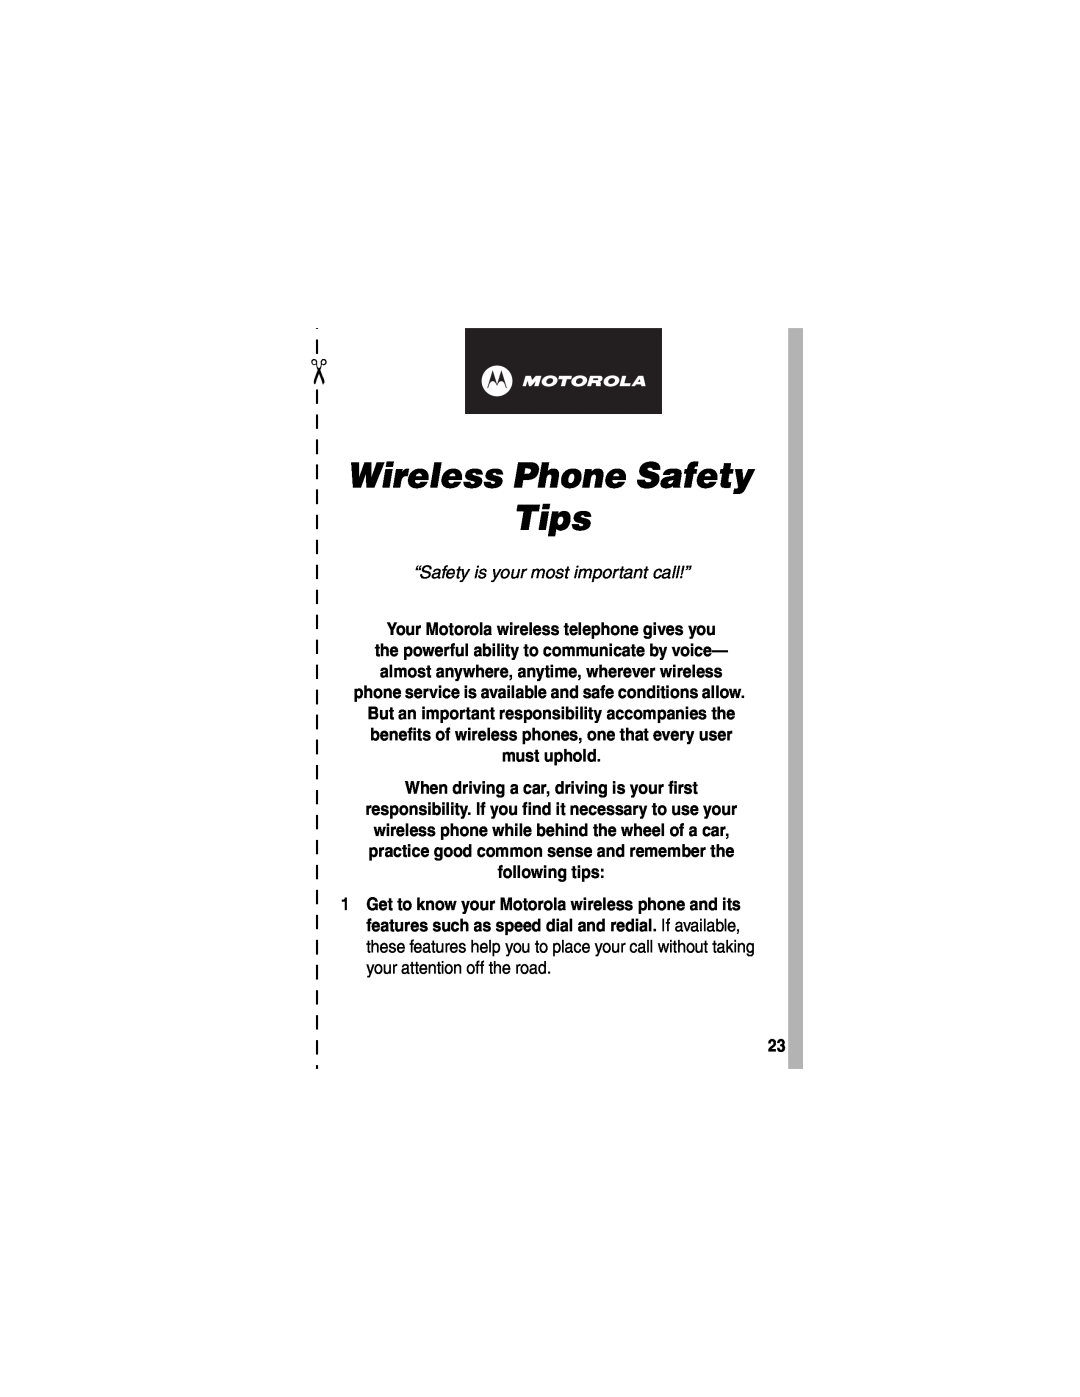 Motorola V551SLVATT manual Wireless Phone Safety Tips, “Safety is your most important call!” 